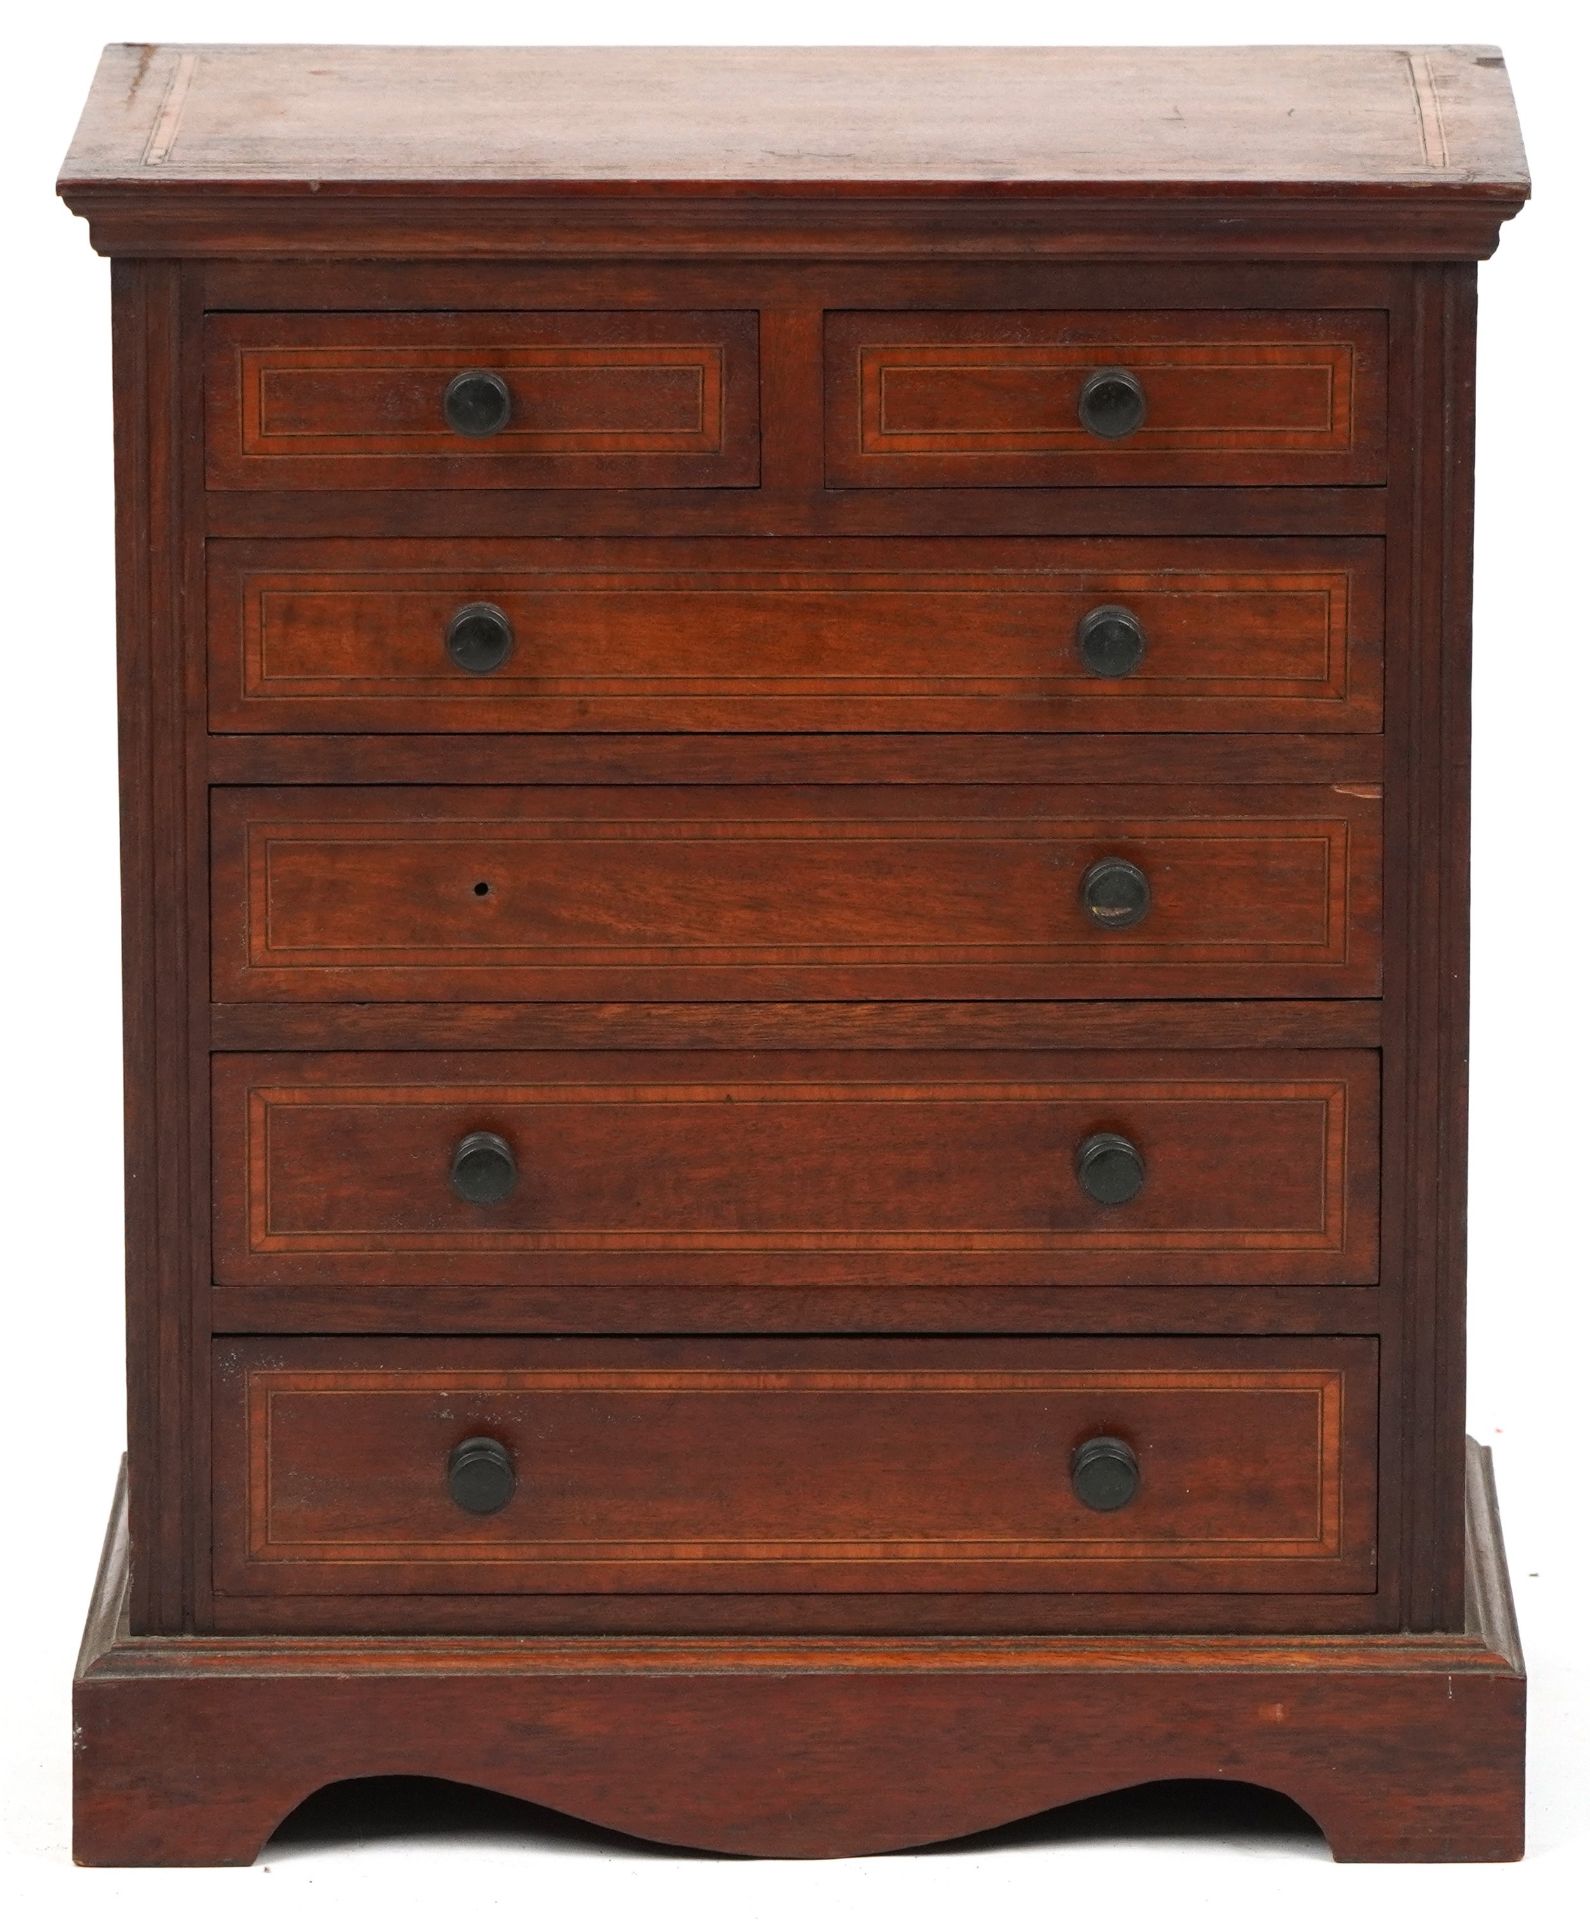 Early 20th century inlaid mahogany apprentice chest fitted with an arrangement of six drawers, - Image 2 of 4